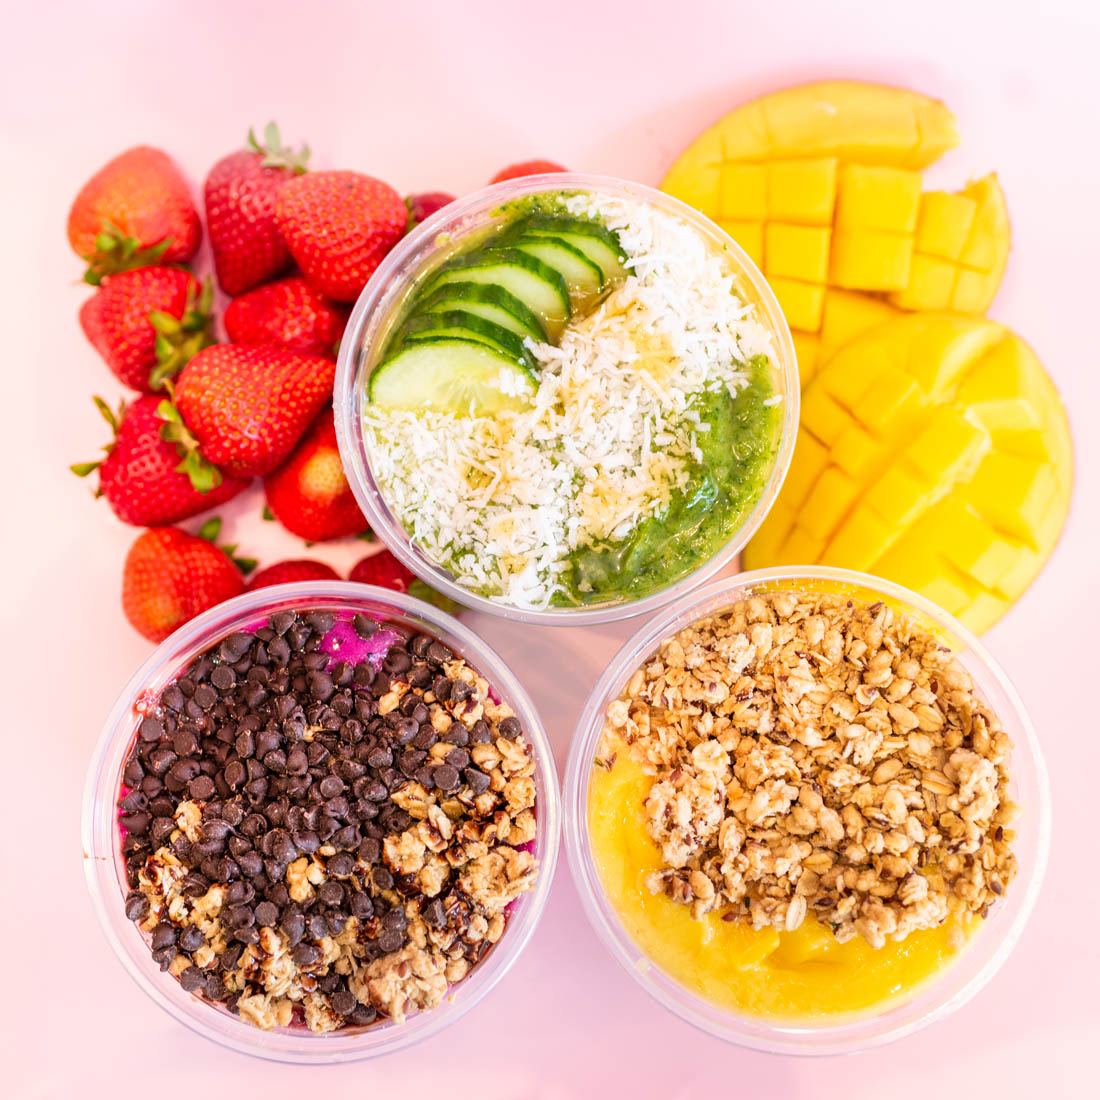 Rush Bowls smoothie bowls nutrition info in Glastonbury, CT.